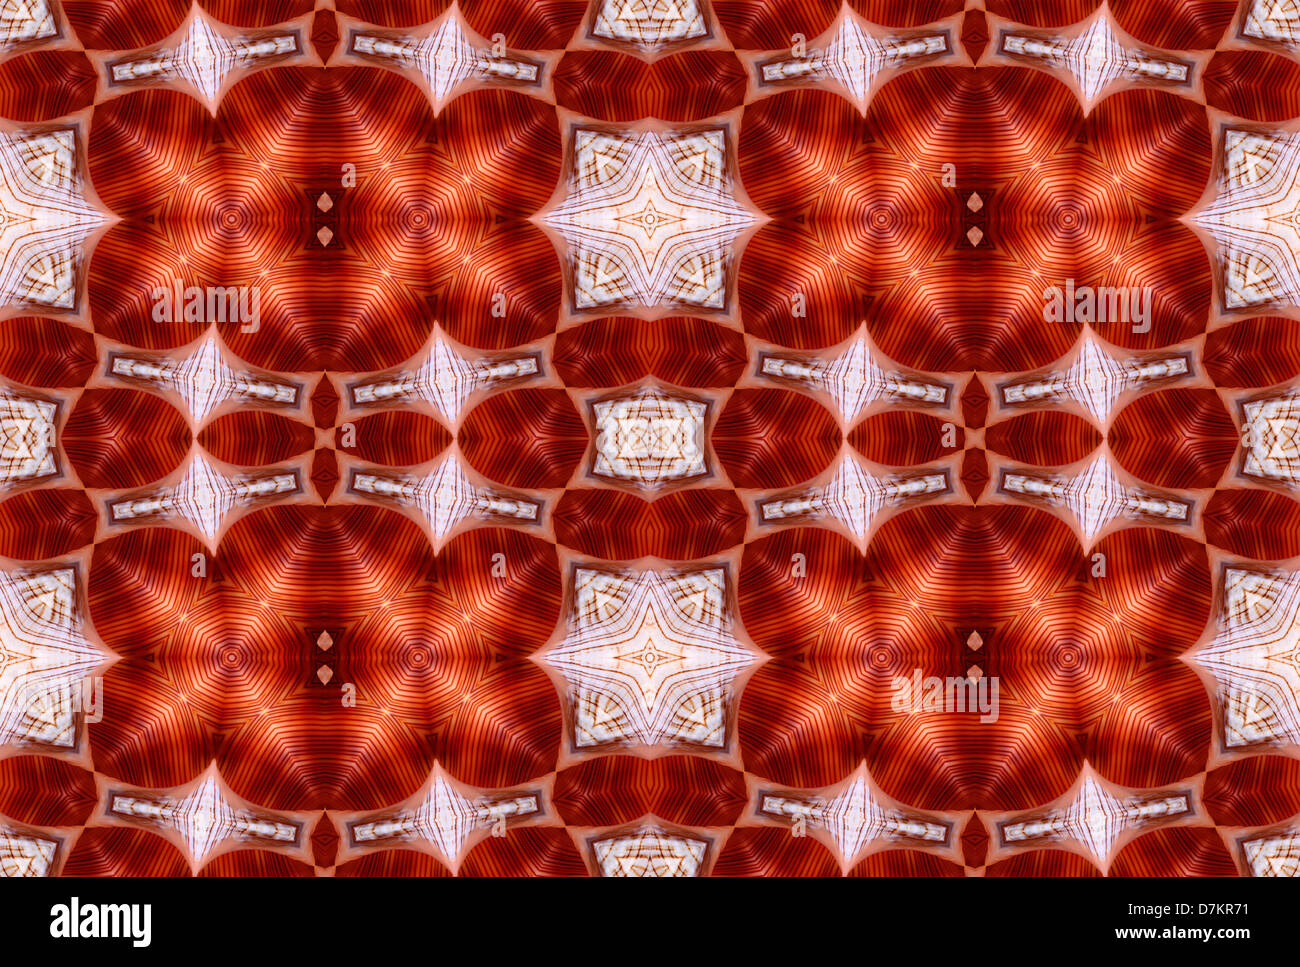 Repeating pattern made from image of Foxhead / Horse Conch seashell (Fasciolaria trapezium Linne) Stock Photo